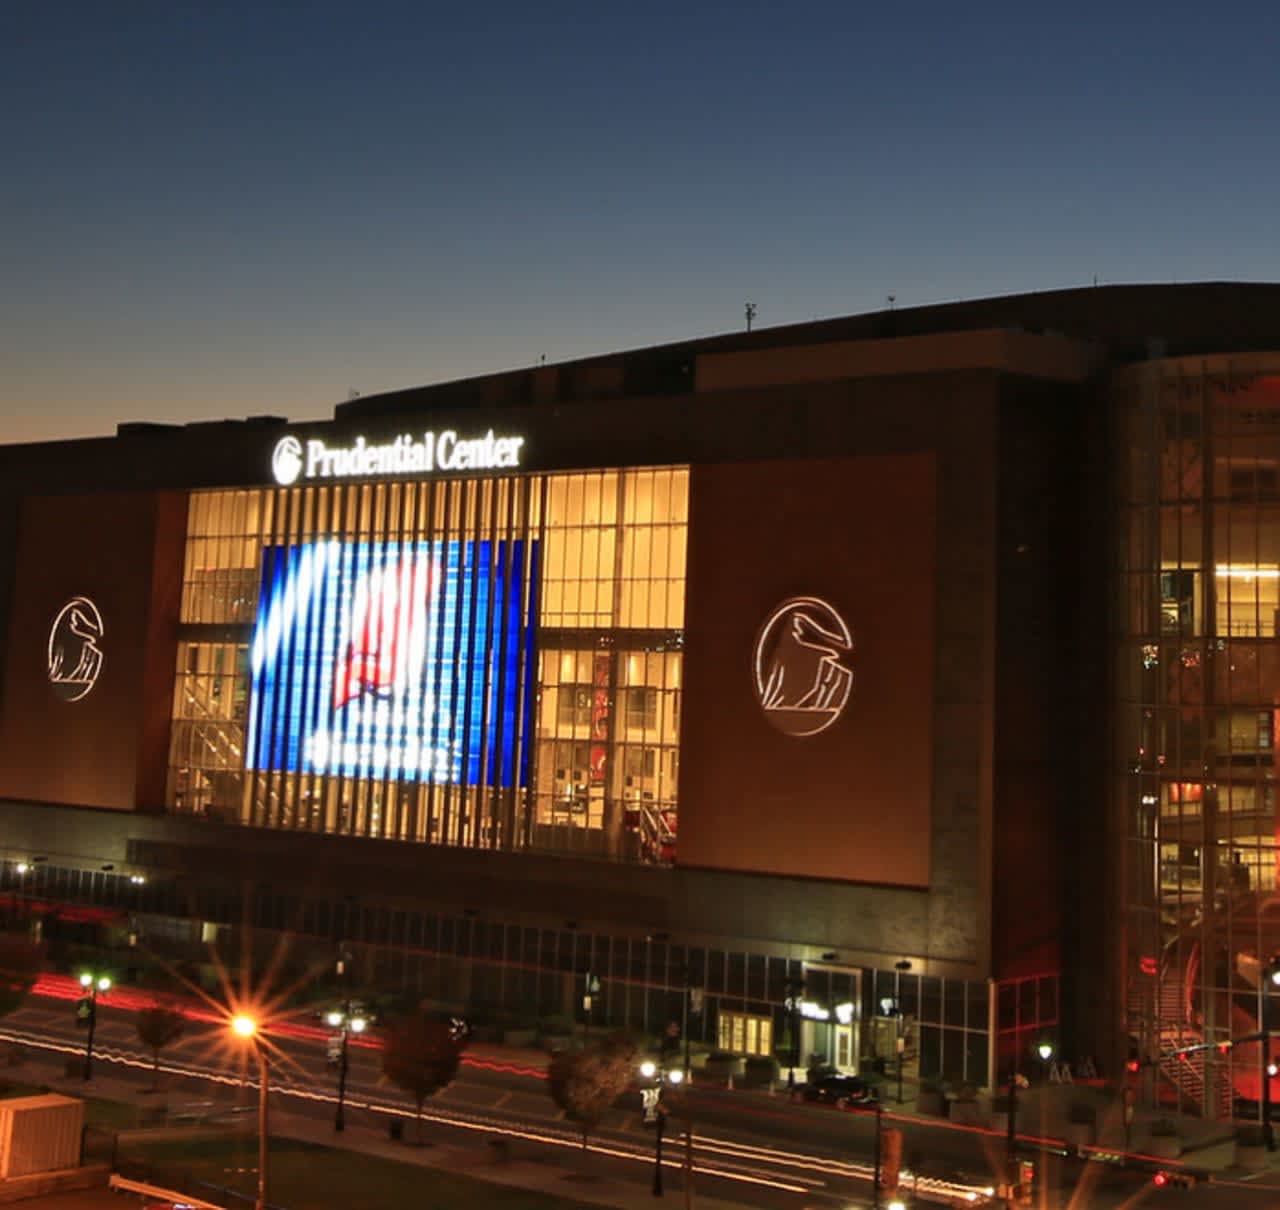 MTV's Video Music Awards will be broadcast from Newark's Prudential Center Monday.